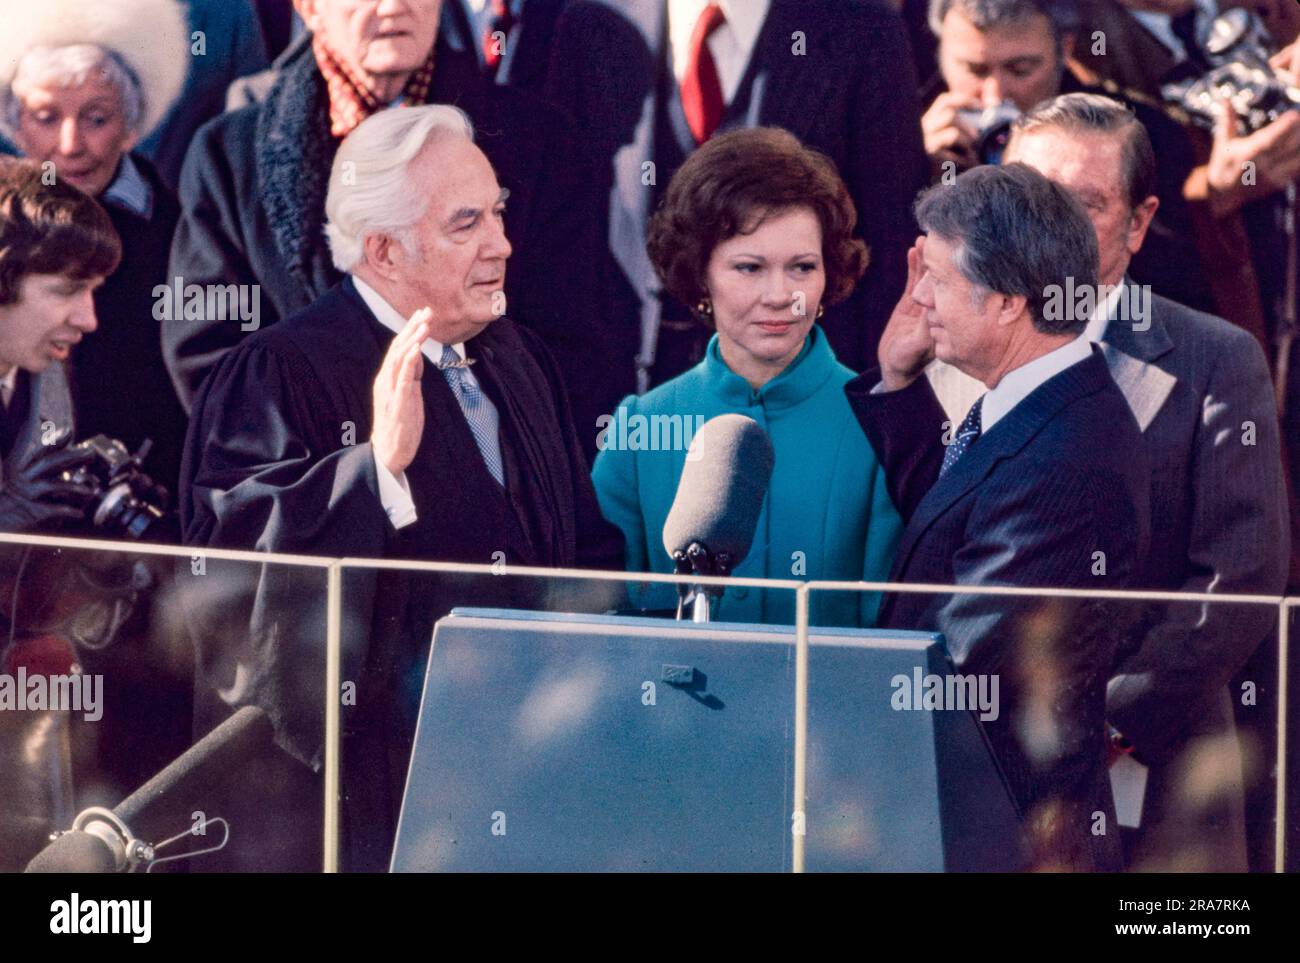 Jimmy Carter is sworn in as 39th President of the United States by Supreme Court Chief Justice Warren Burger. By Carter's side is his wife, Rosalynn and Vice President Walter Mondale. Photograph by Bernard Gotfryd Stock Photo